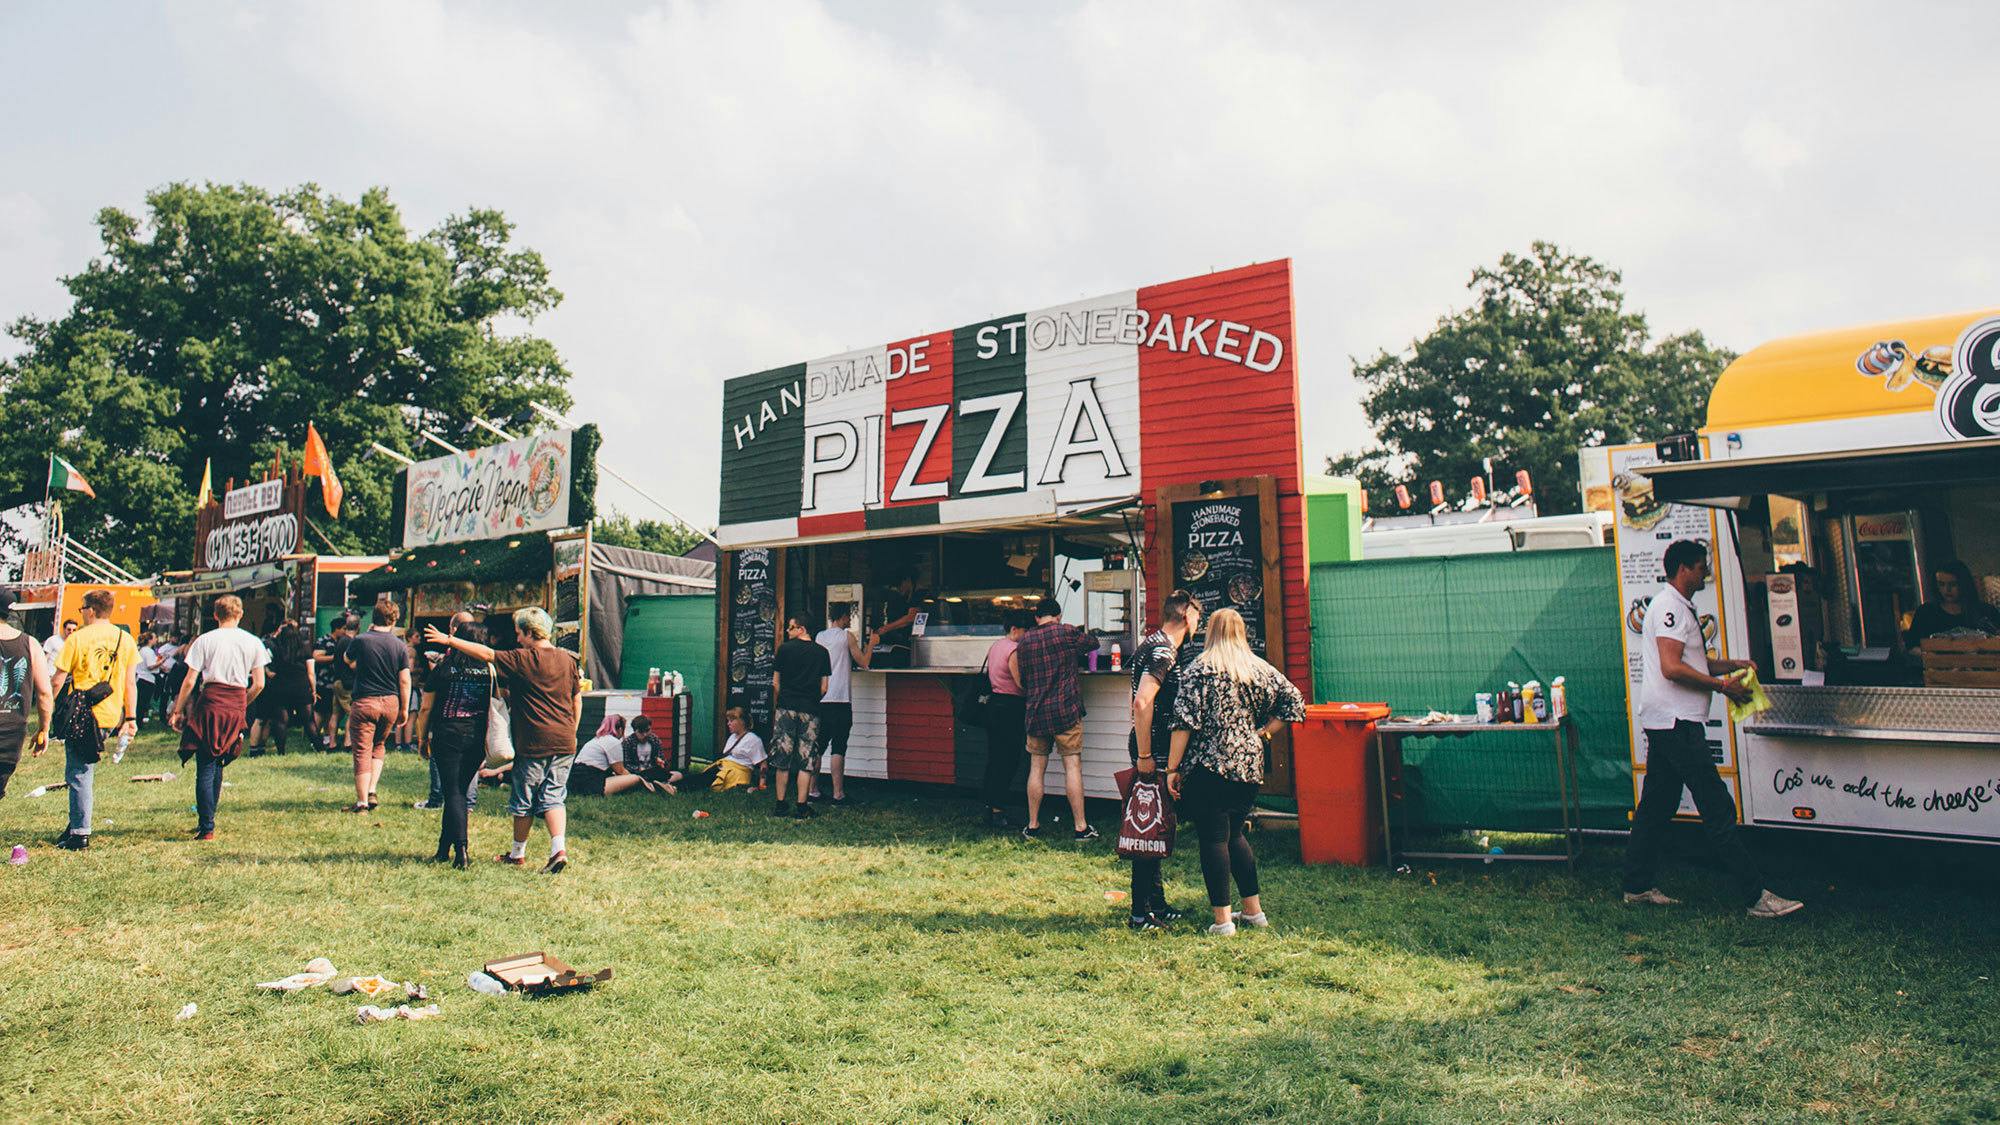 Deliveroo Is Looking For A 'Festival Food Taster'